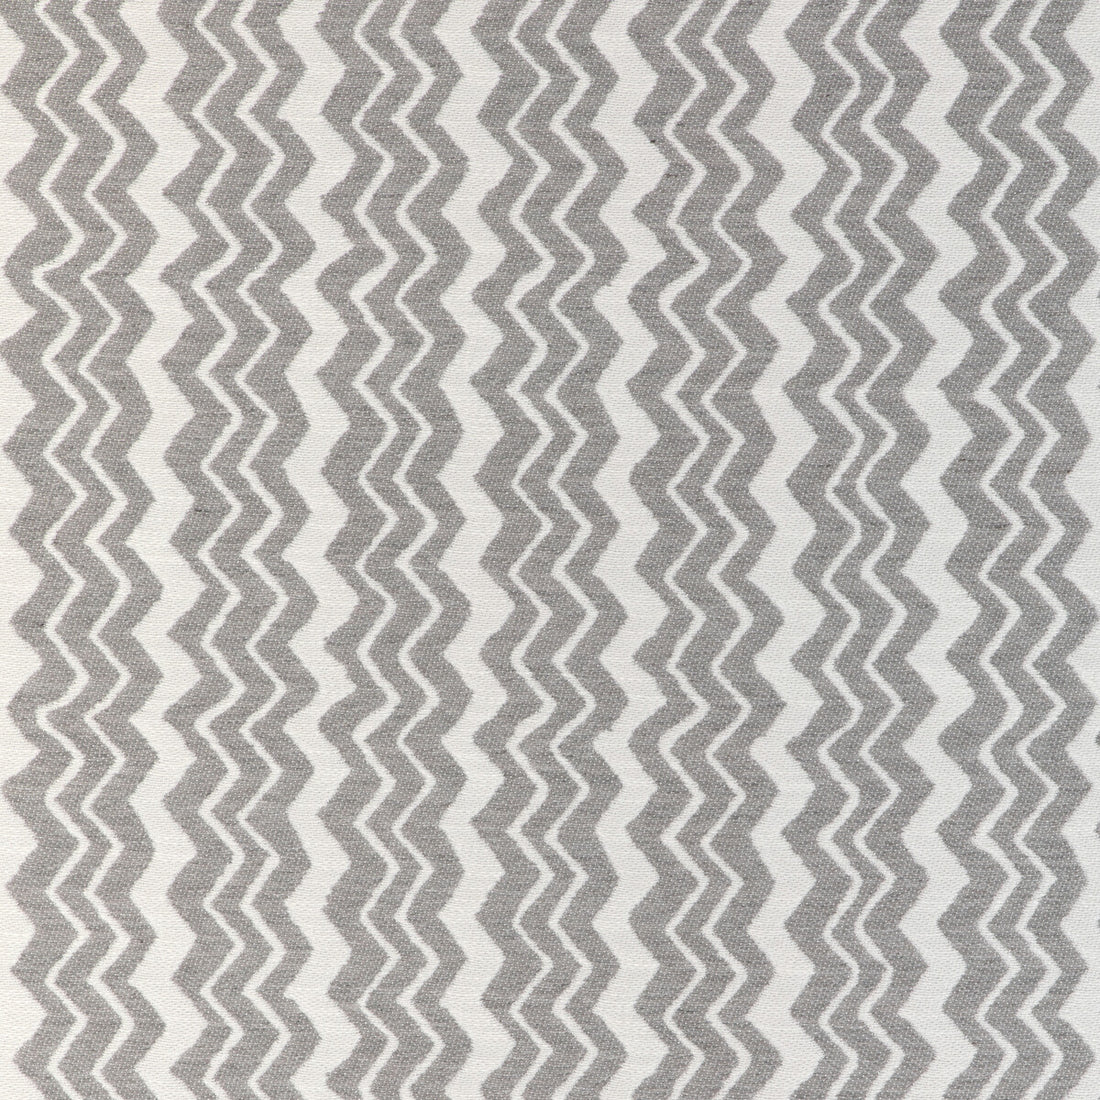 Matipi fabric in driftwood color - pattern 36925.11.0 - by Kravet Couture in the Riviera collection